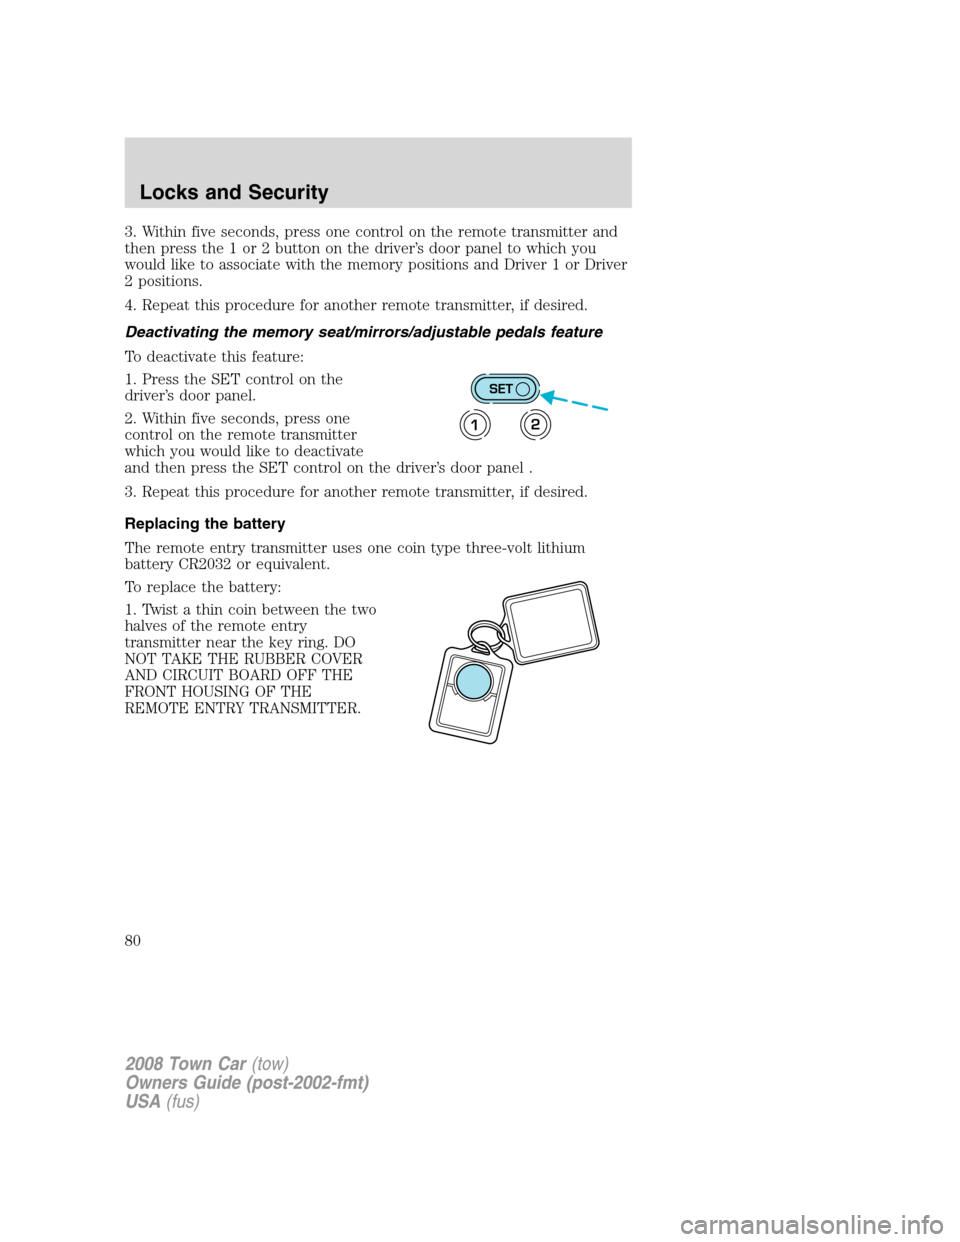 LINCOLN TOWN CAR 2008  Owners Manual 3. Within five seconds, press one control on the remote transmitter and
then press the 1 or 2 button on the driver’s door panel to which you
would like to associate with the memory positions and Dri